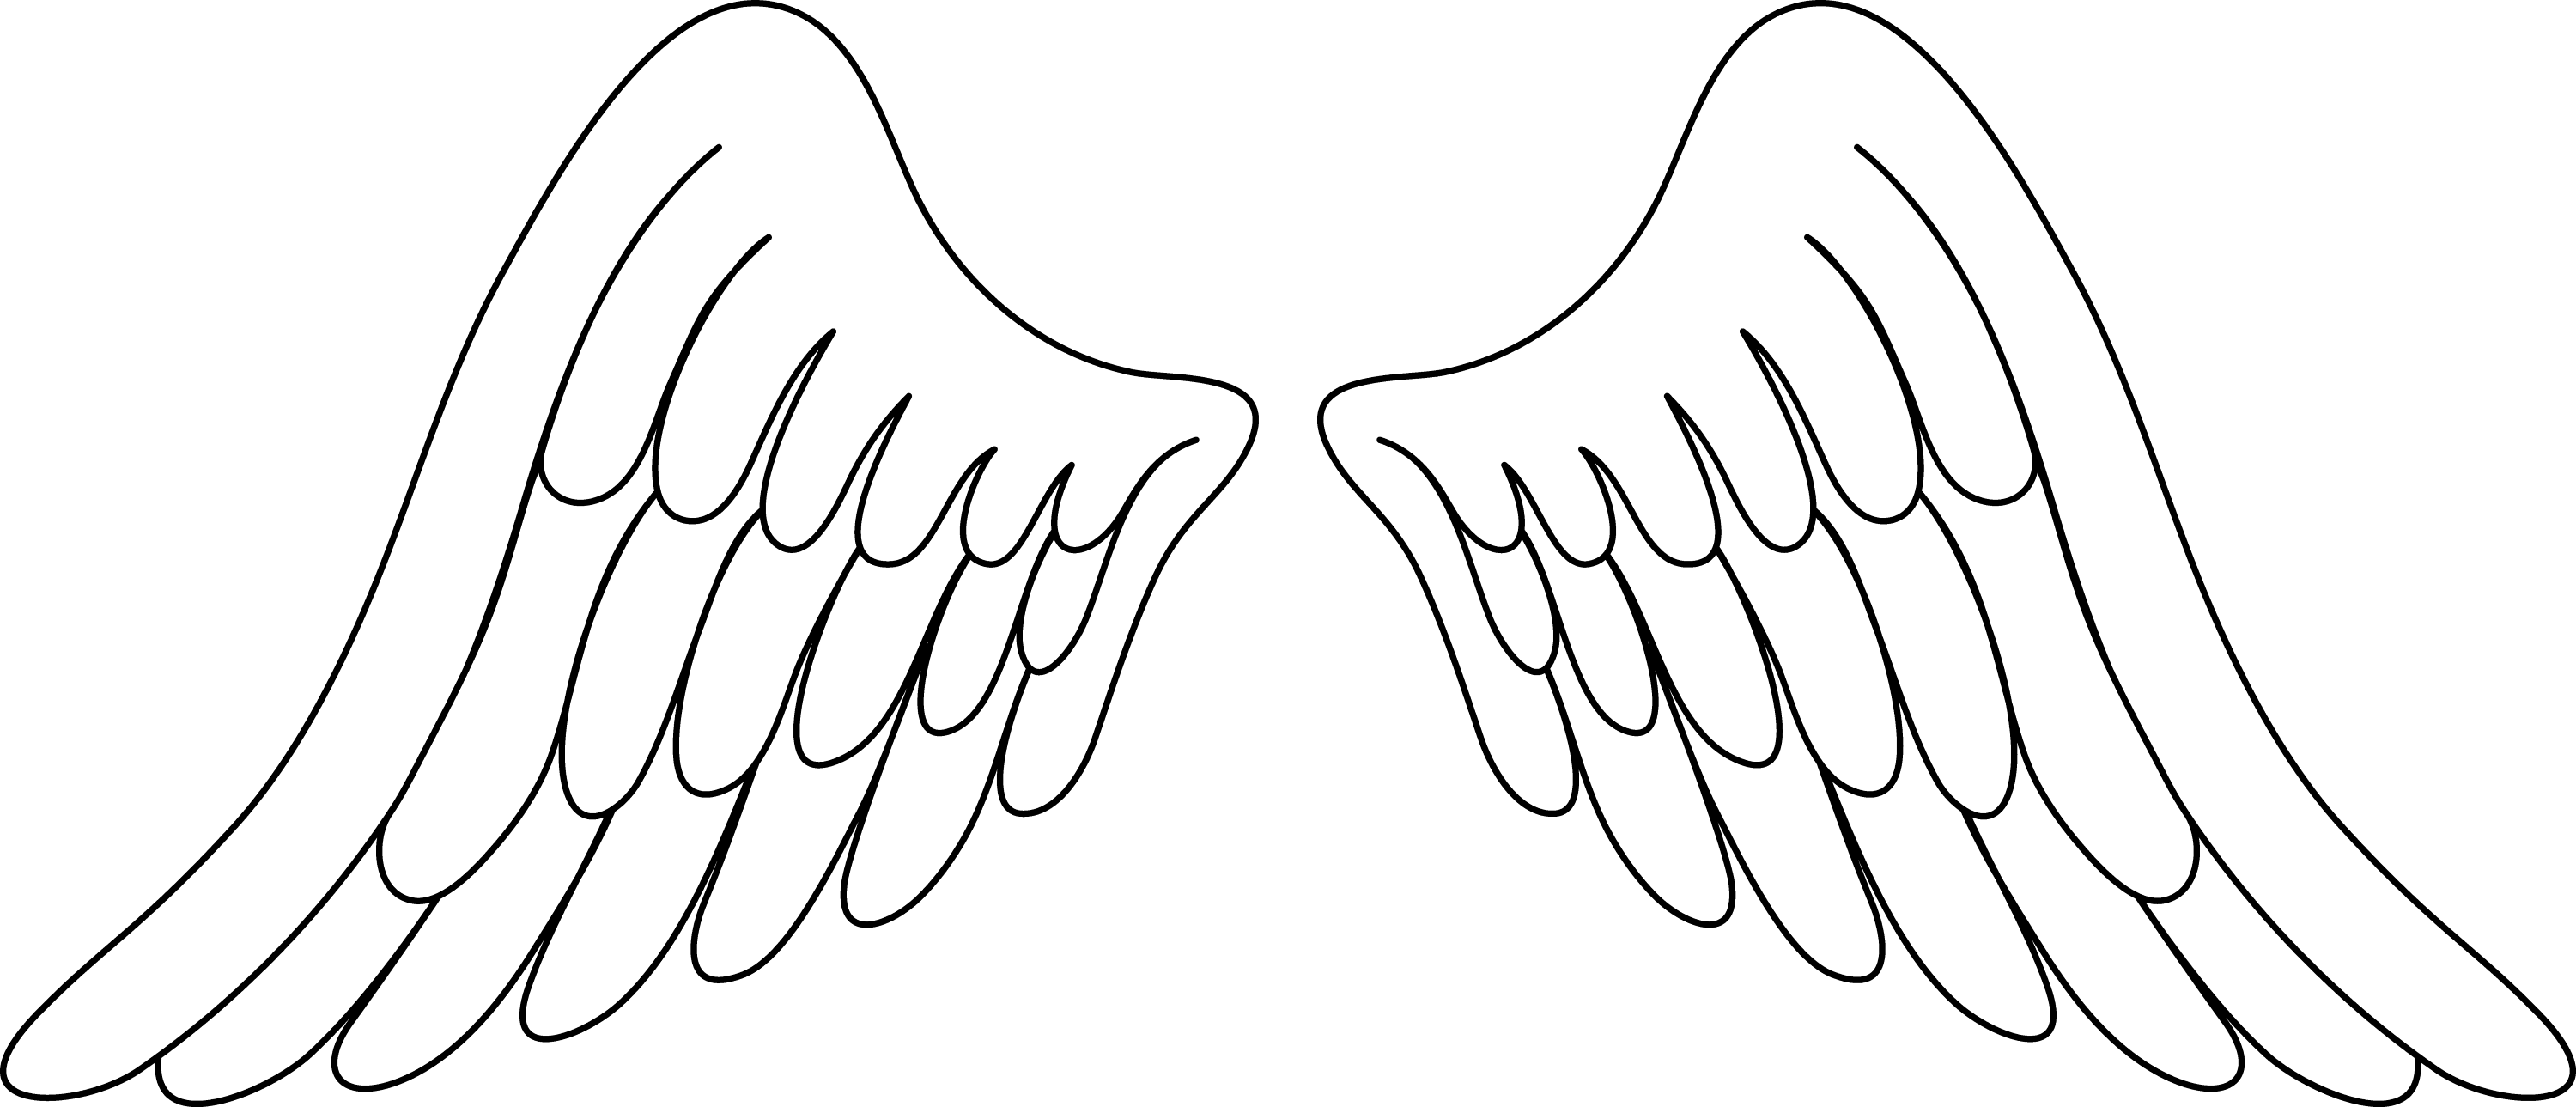 free angel clipart black and white - photo #7